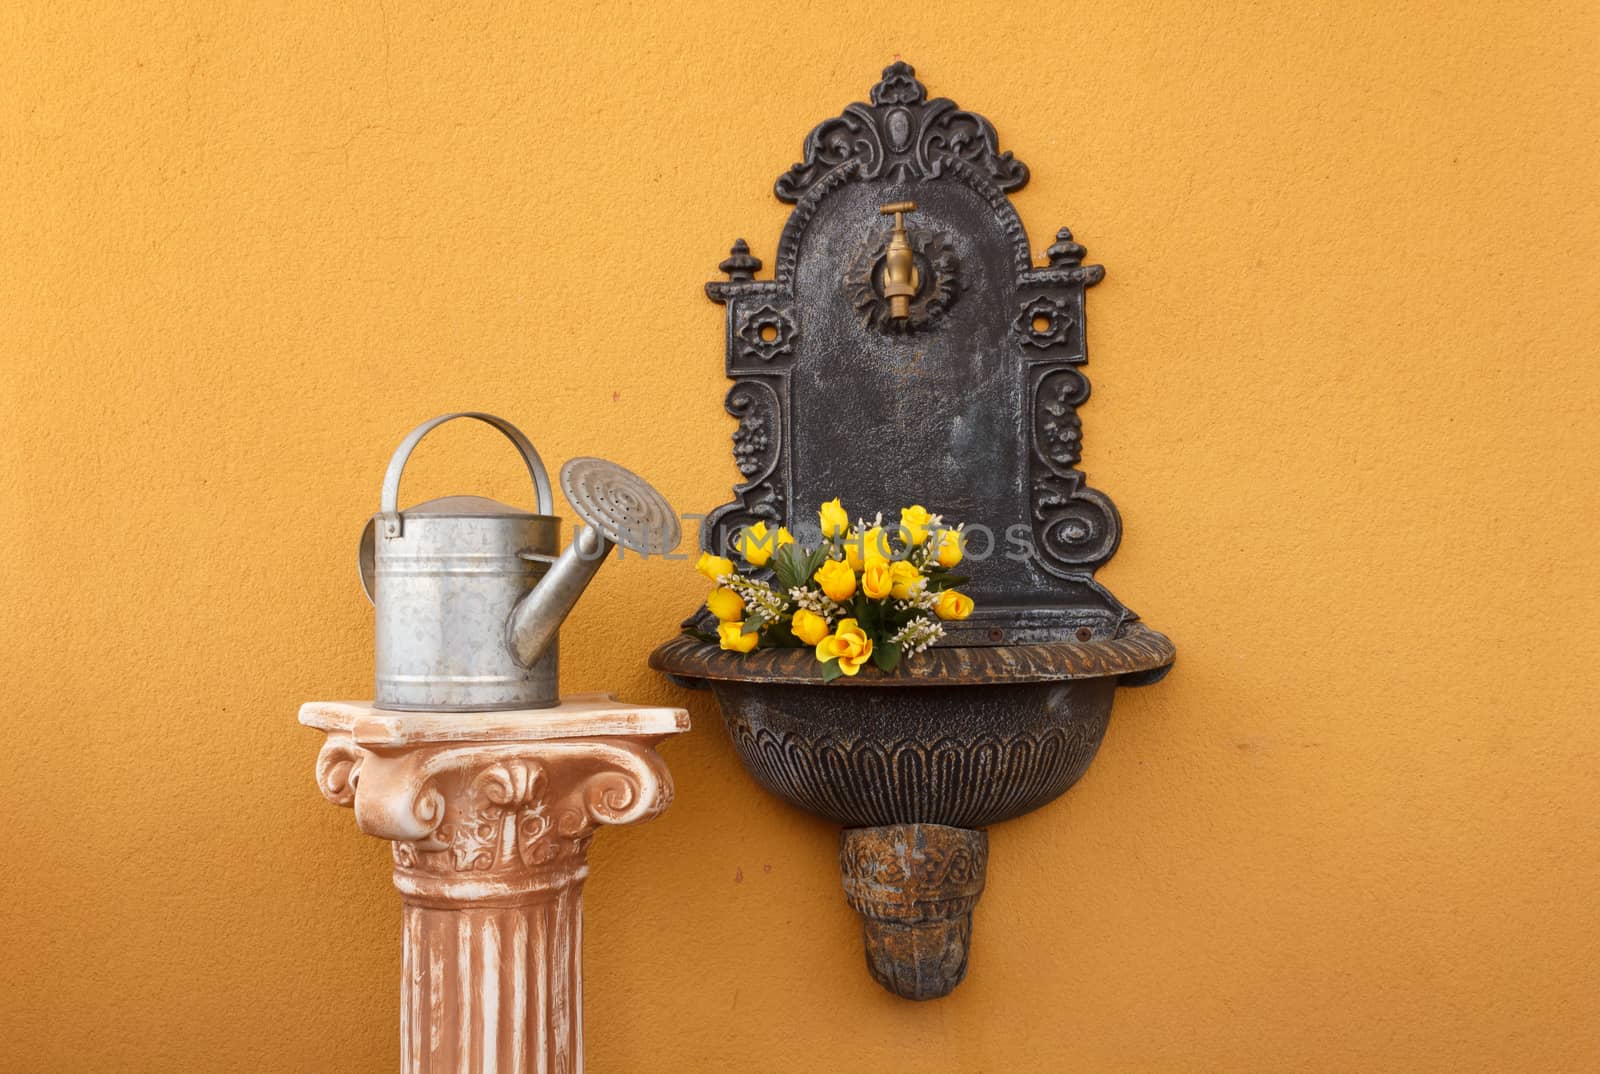 cast iron wall fountain flanked by a greek ionic column  above  with a watering can to water the roses